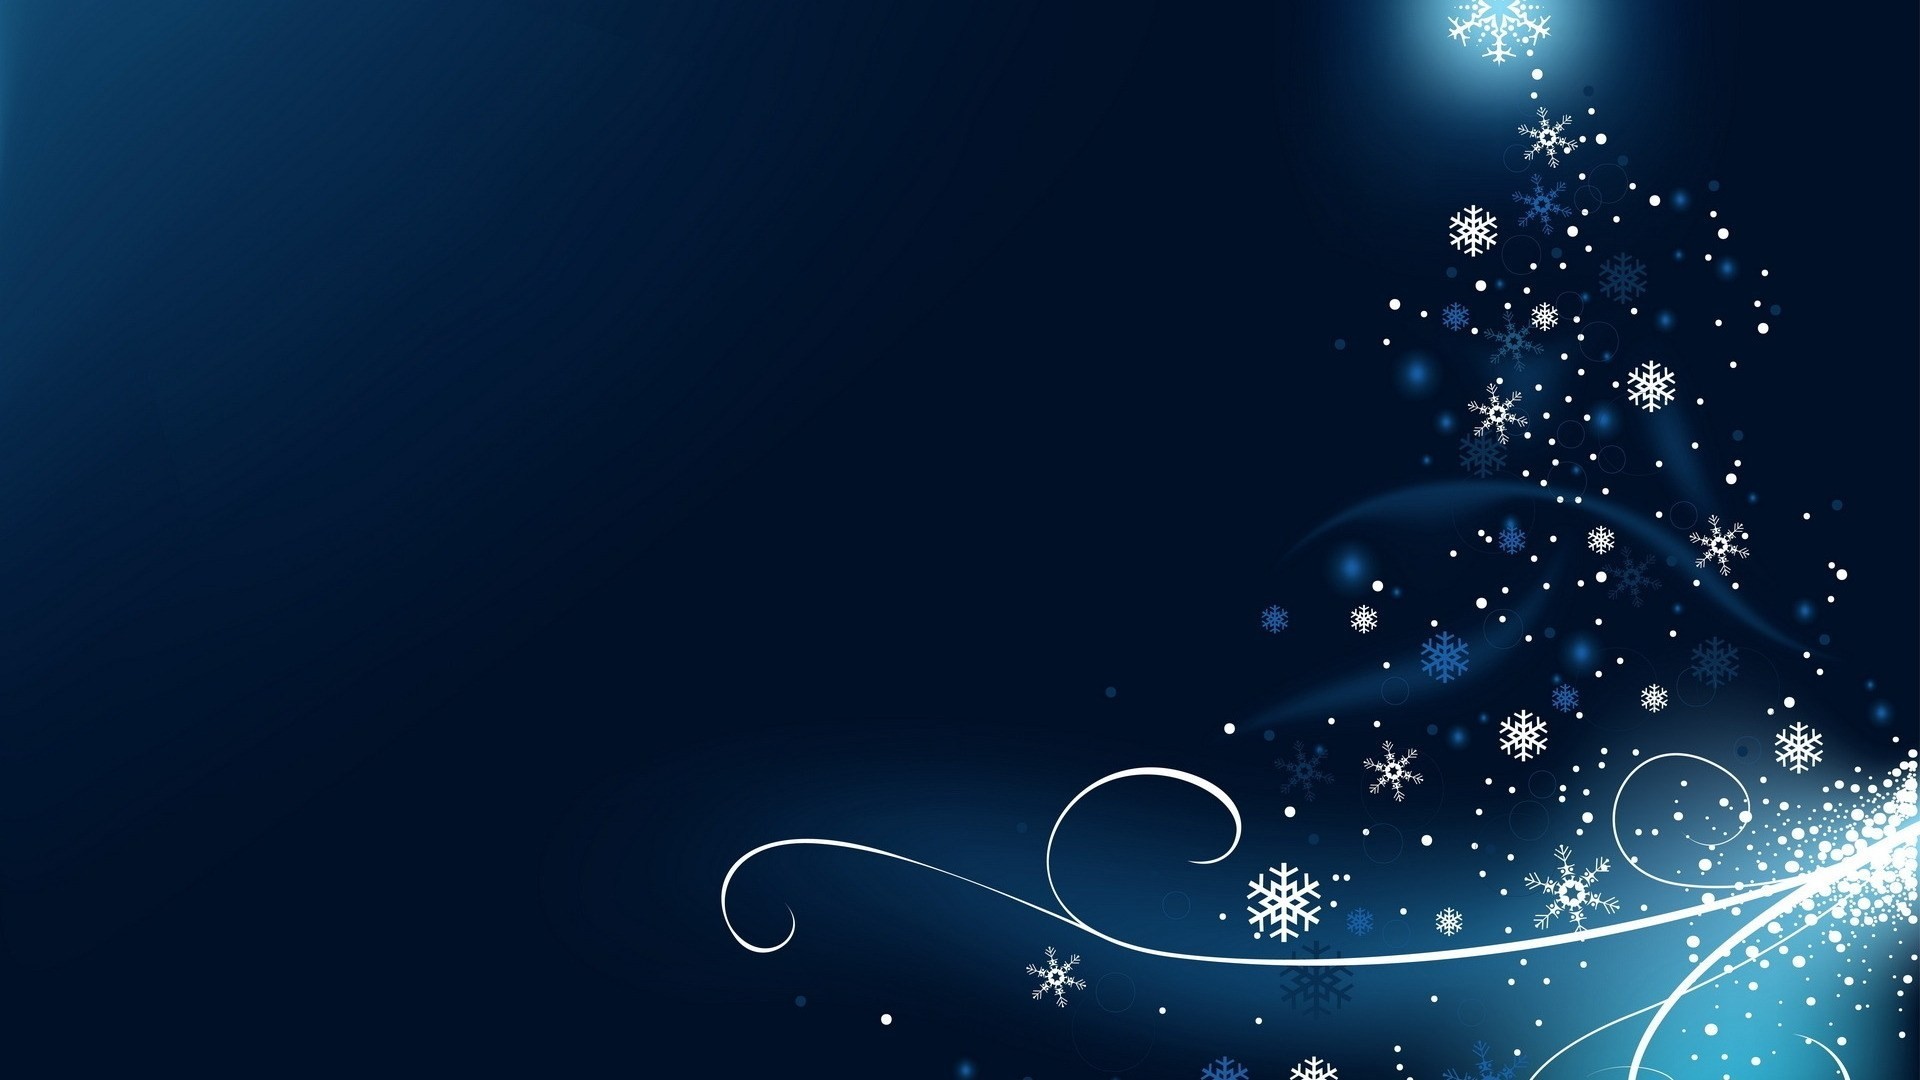 1920x1080 Right Click on this wallpapers: Snowflake Wallpaper For Computer to  download and select option "Save image as..."